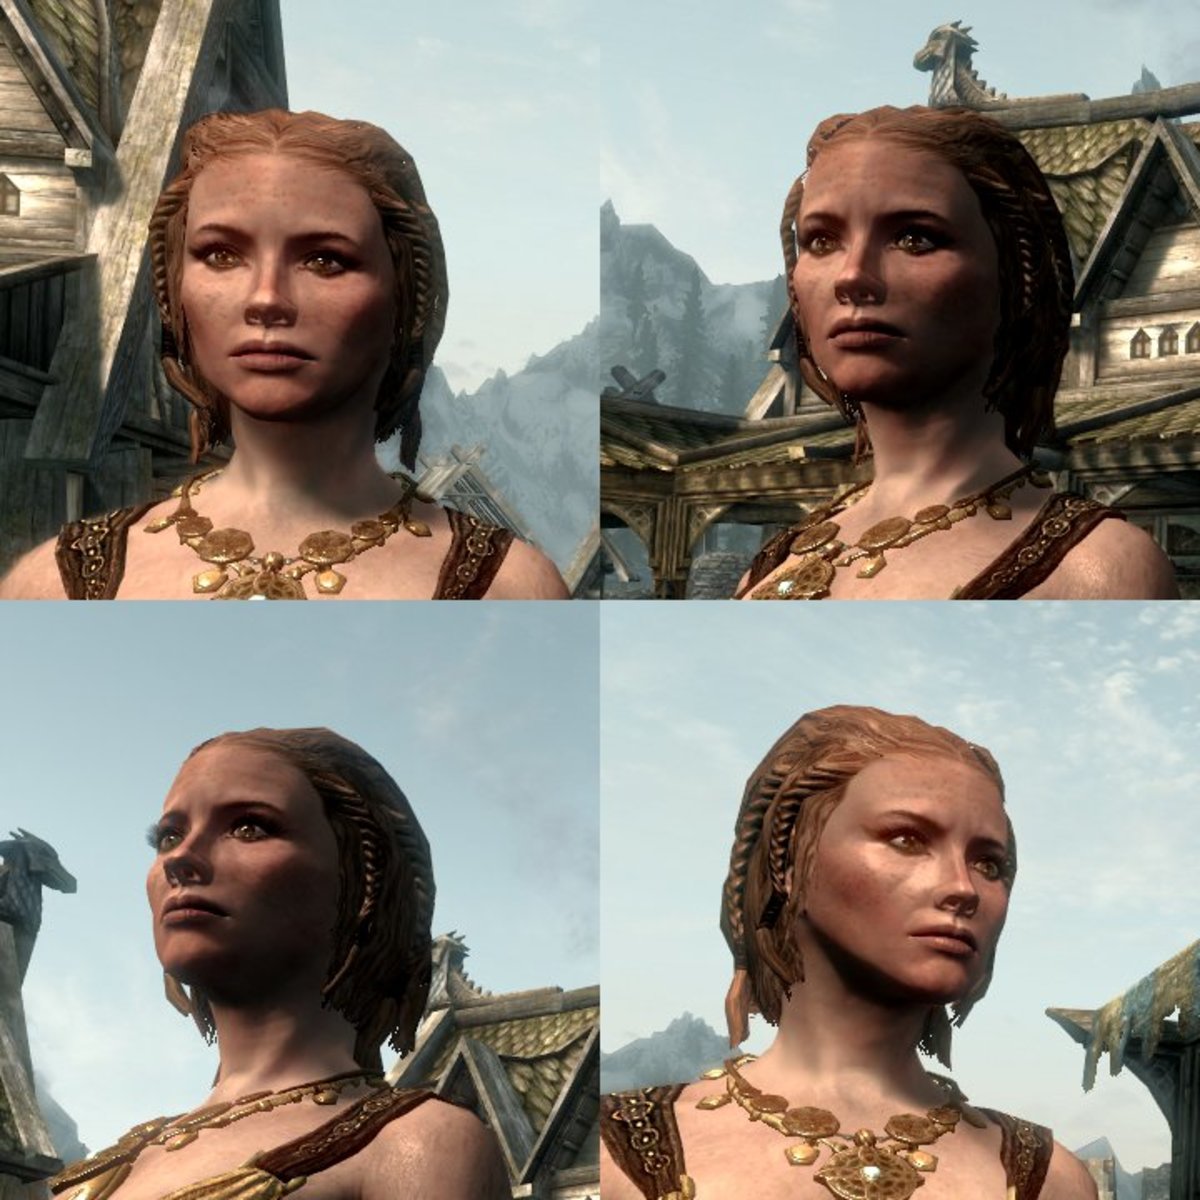 This character uses navetsea's Female Face Retexture. I find navetsea's works well for wrinkles, but is overkill for Nords (who have no wrinkles to speak of).